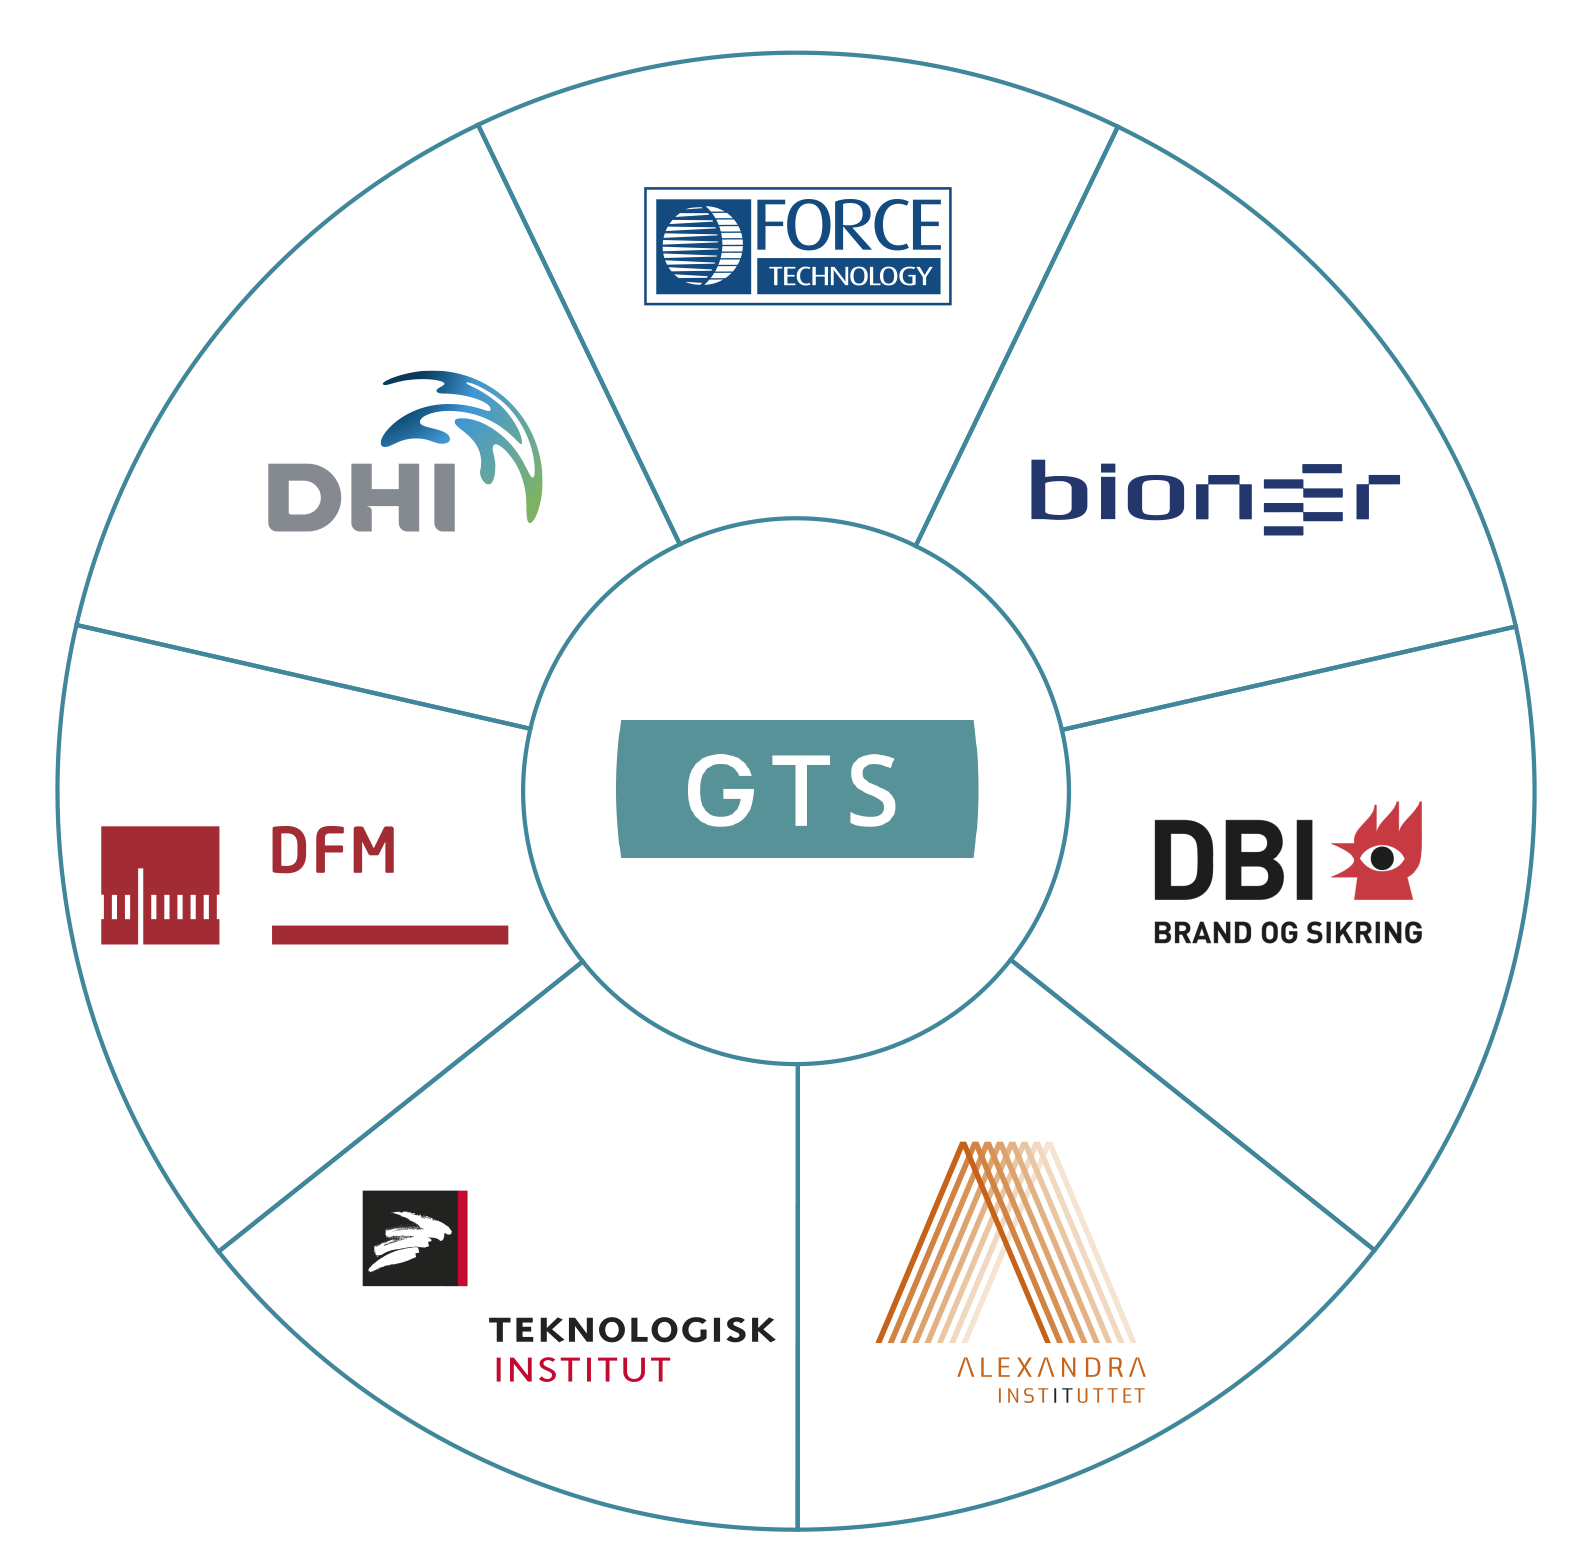 GTS network in Denmark constitutes of 7 approved Research and Technology Organisations (RTO)